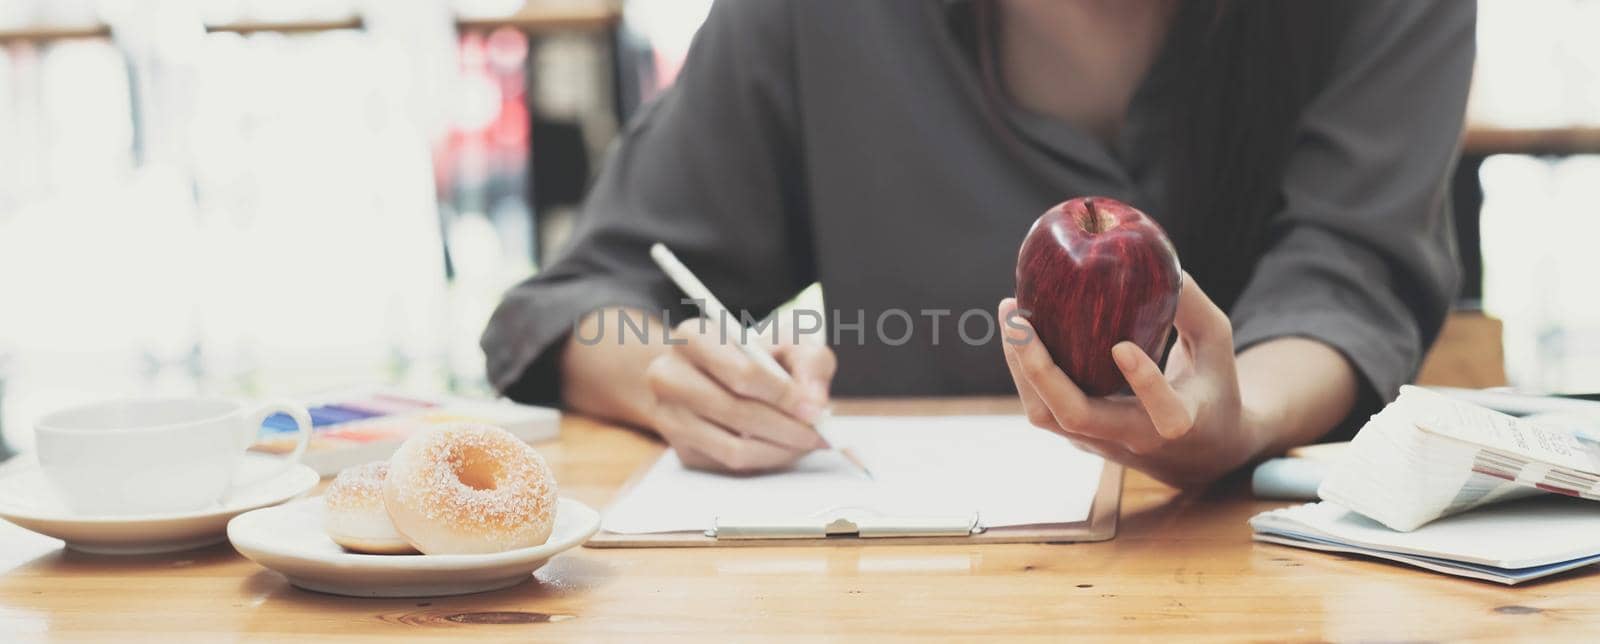 Attractive young asian female graphic designer eating an apple and sketching designing her design on paper at her office desk. by wichayada